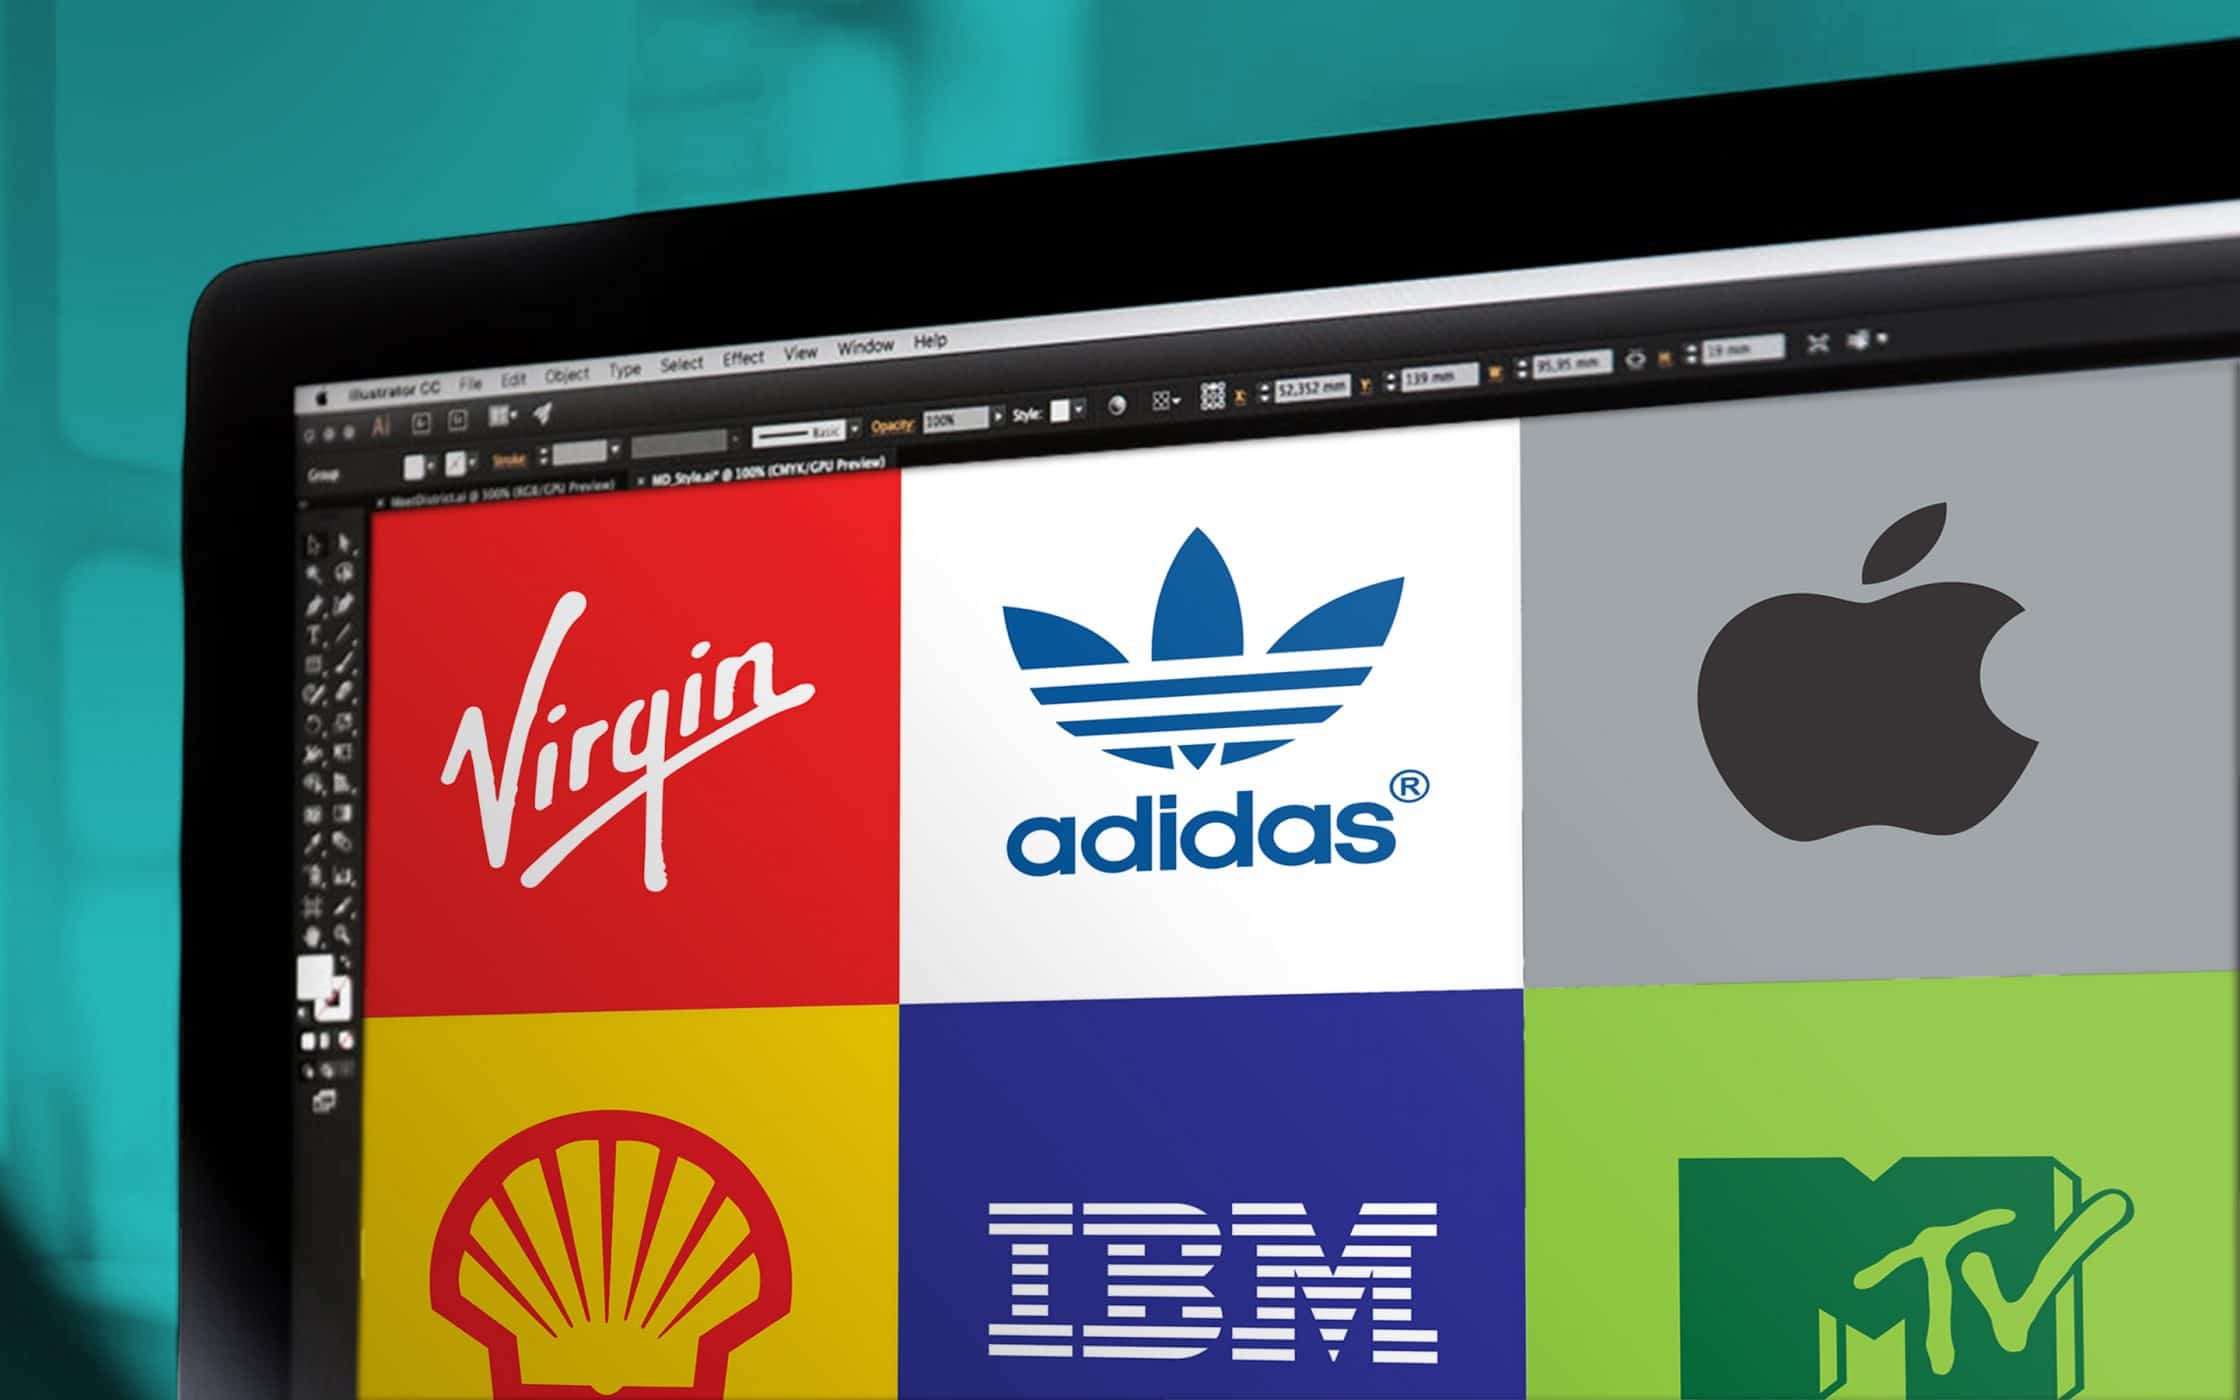 Famous Company Logo - What Makes A Good Logo? Famous Company Logos To Inspire Your Own